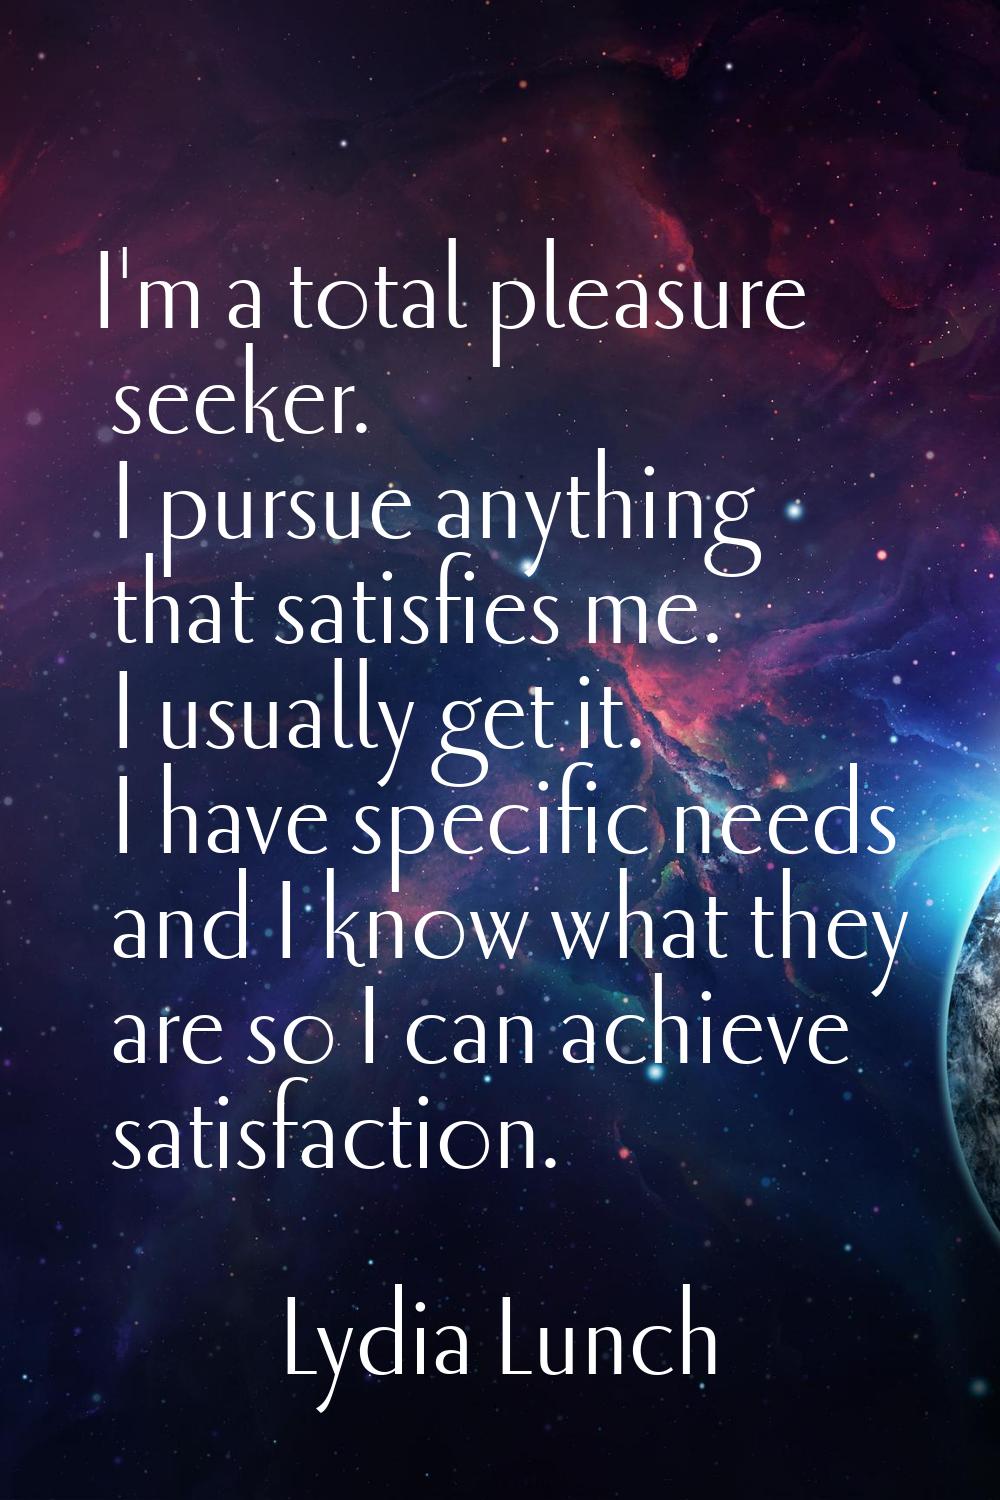 I'm a total pleasure seeker. I pursue anything that satisfies me. I usually get it. I have specific